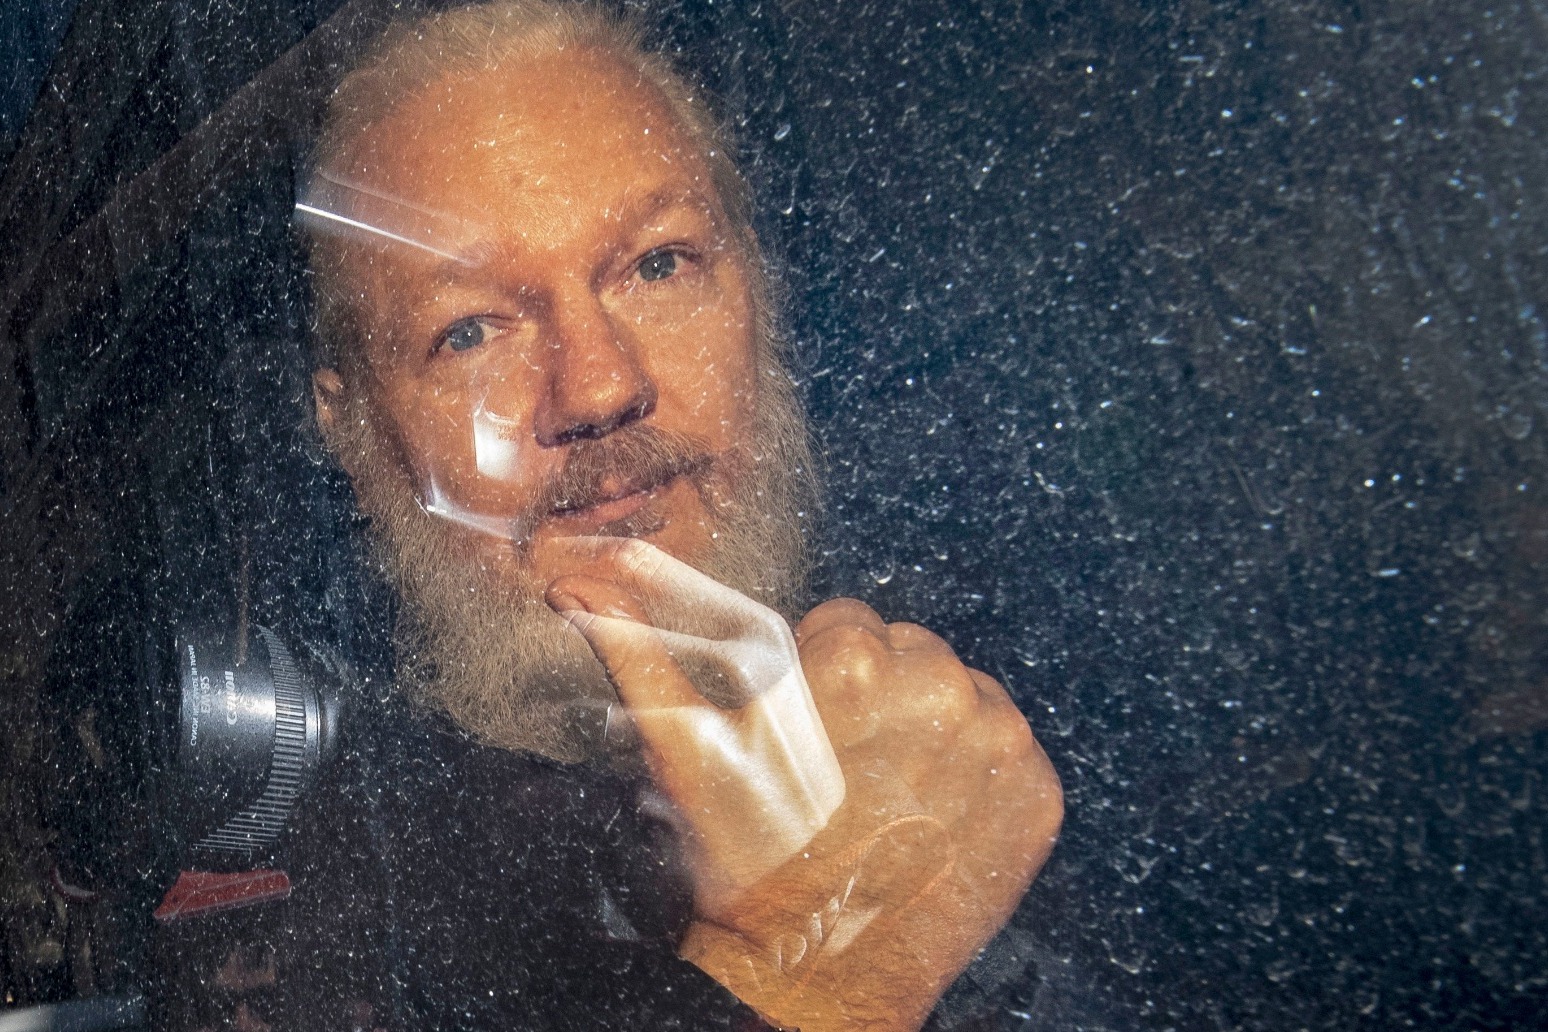 SWEDEN\'S MOVE TO DROP ASSANGE INQUIRY WELCOMED BY WIKILEAKS 